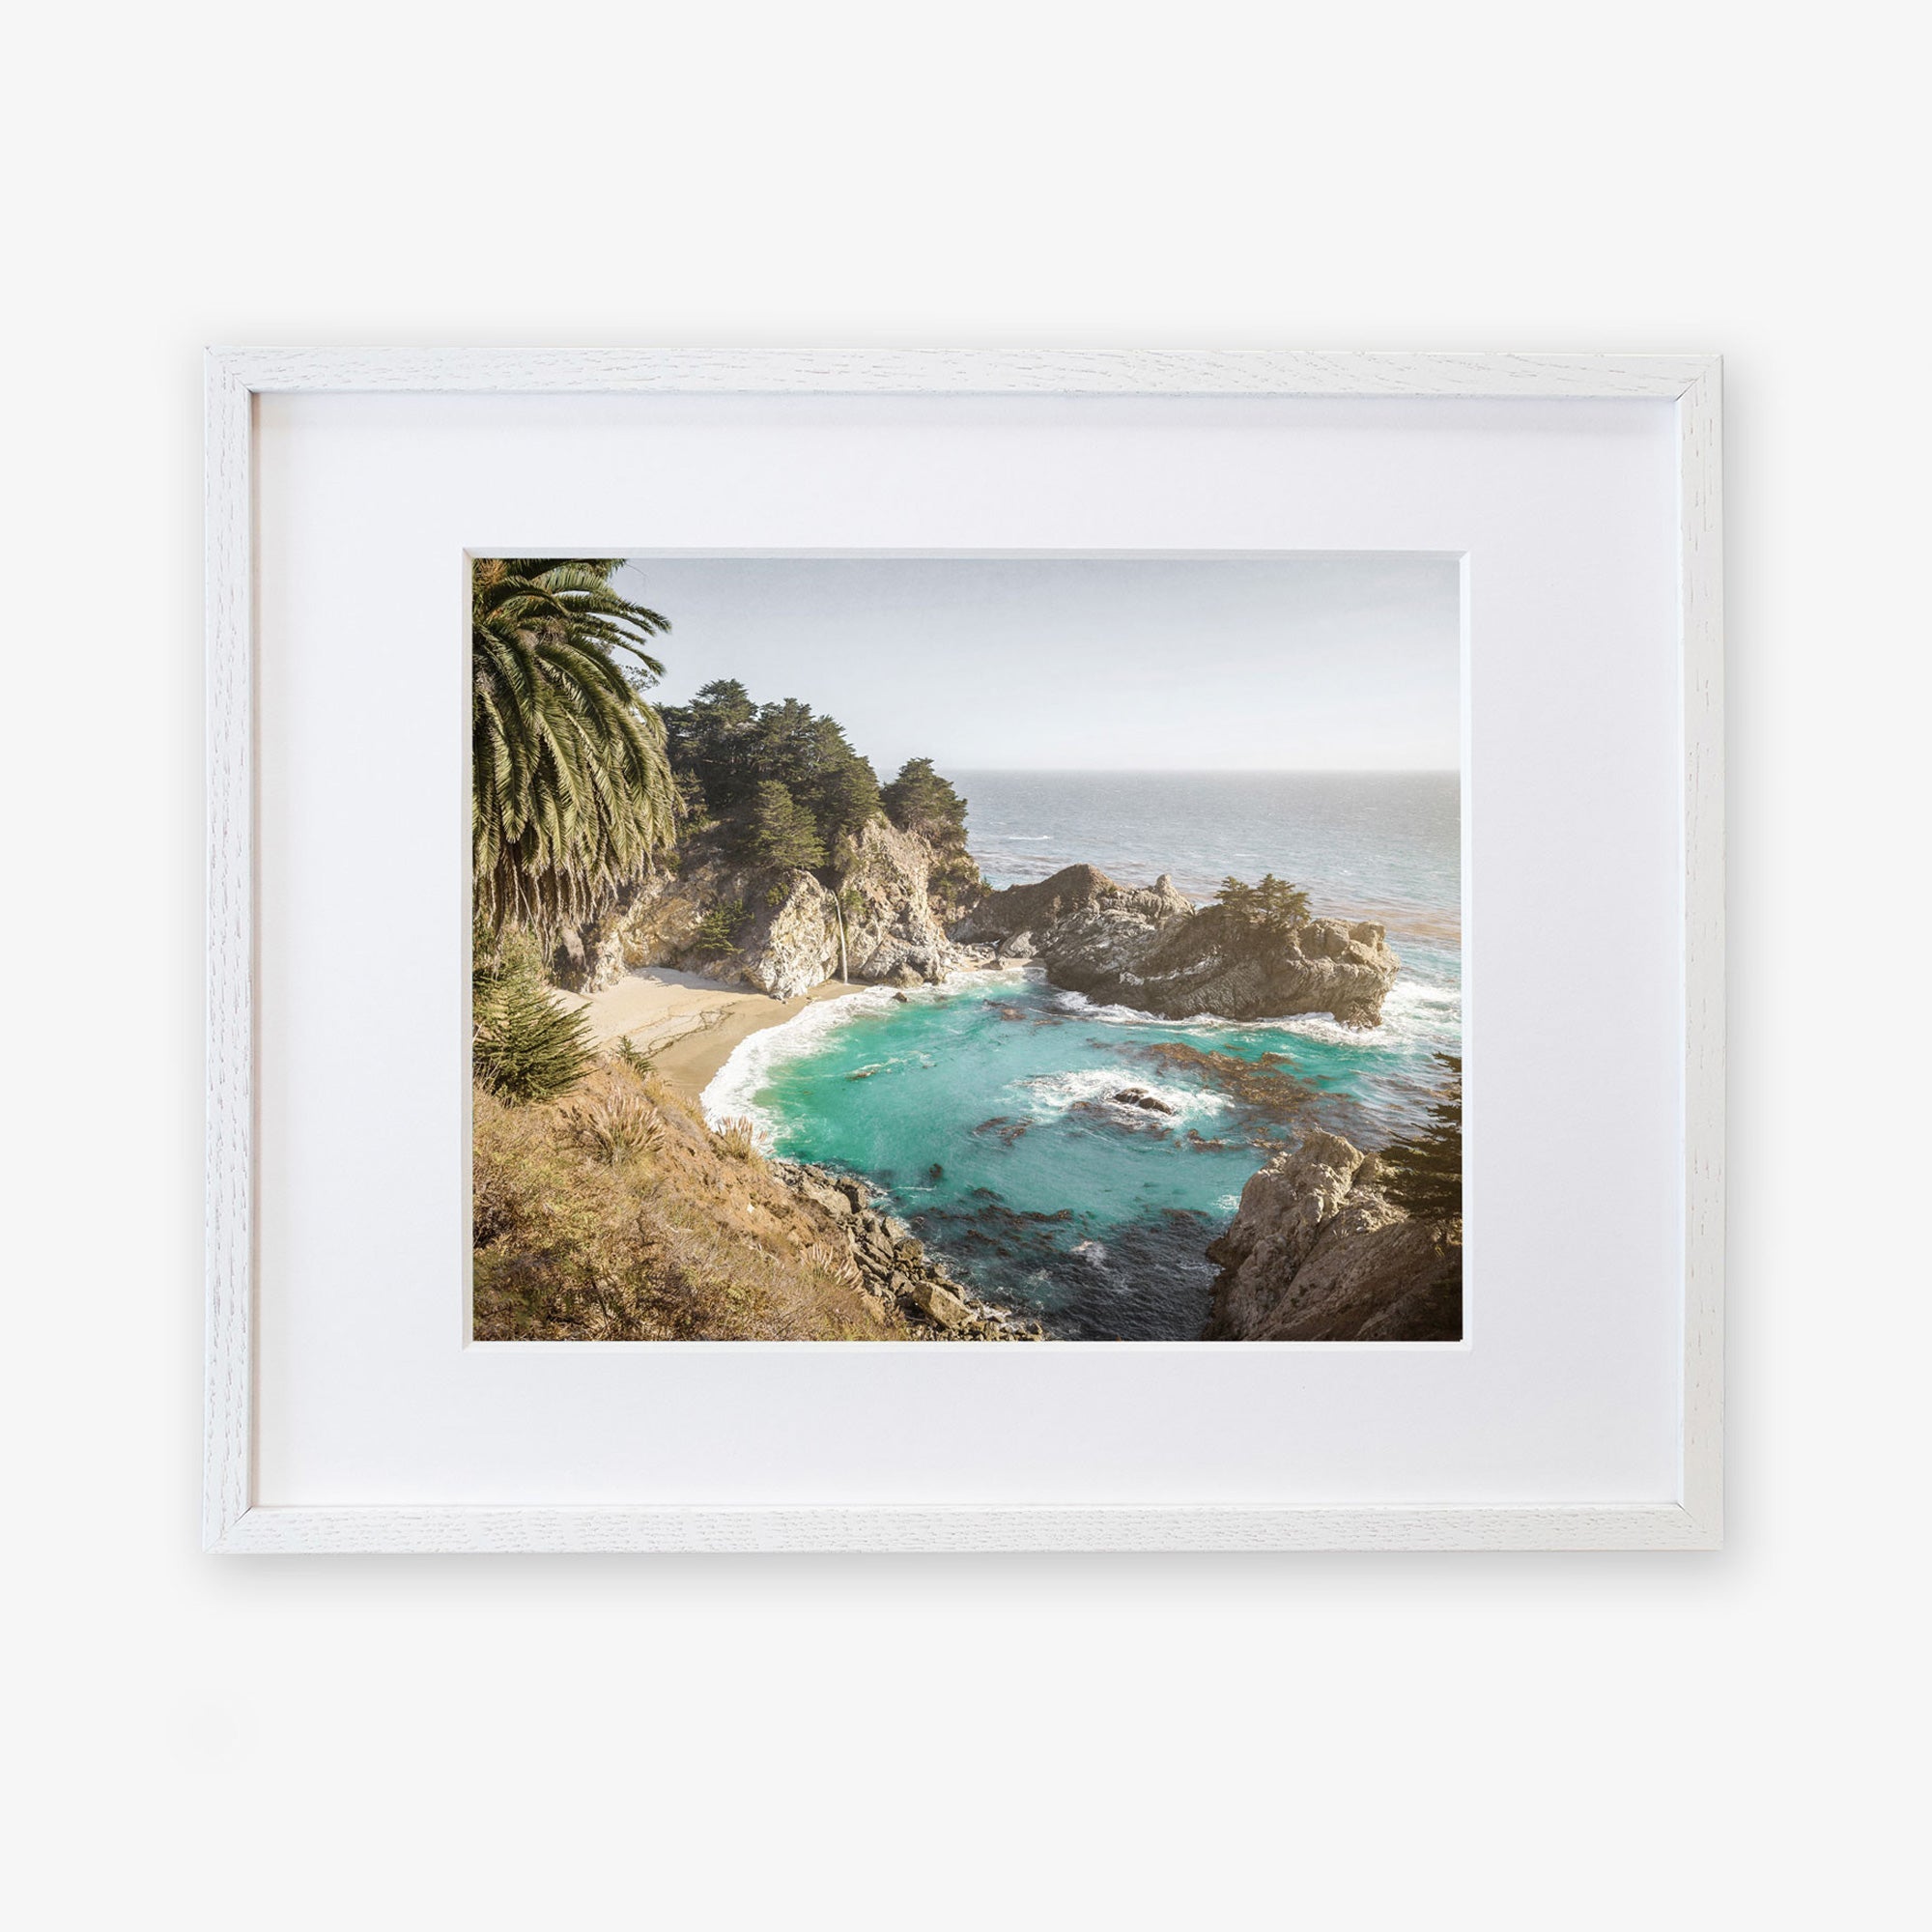 A framed artwork depicting a scenic view of the Pacific Coast Highway with turquoise waters, rocky cliffs, and lush greenery, displayed on a white background is the Big Sur Coastal Print by &#39;Julia Pffeifer&#39; from Offley Green.